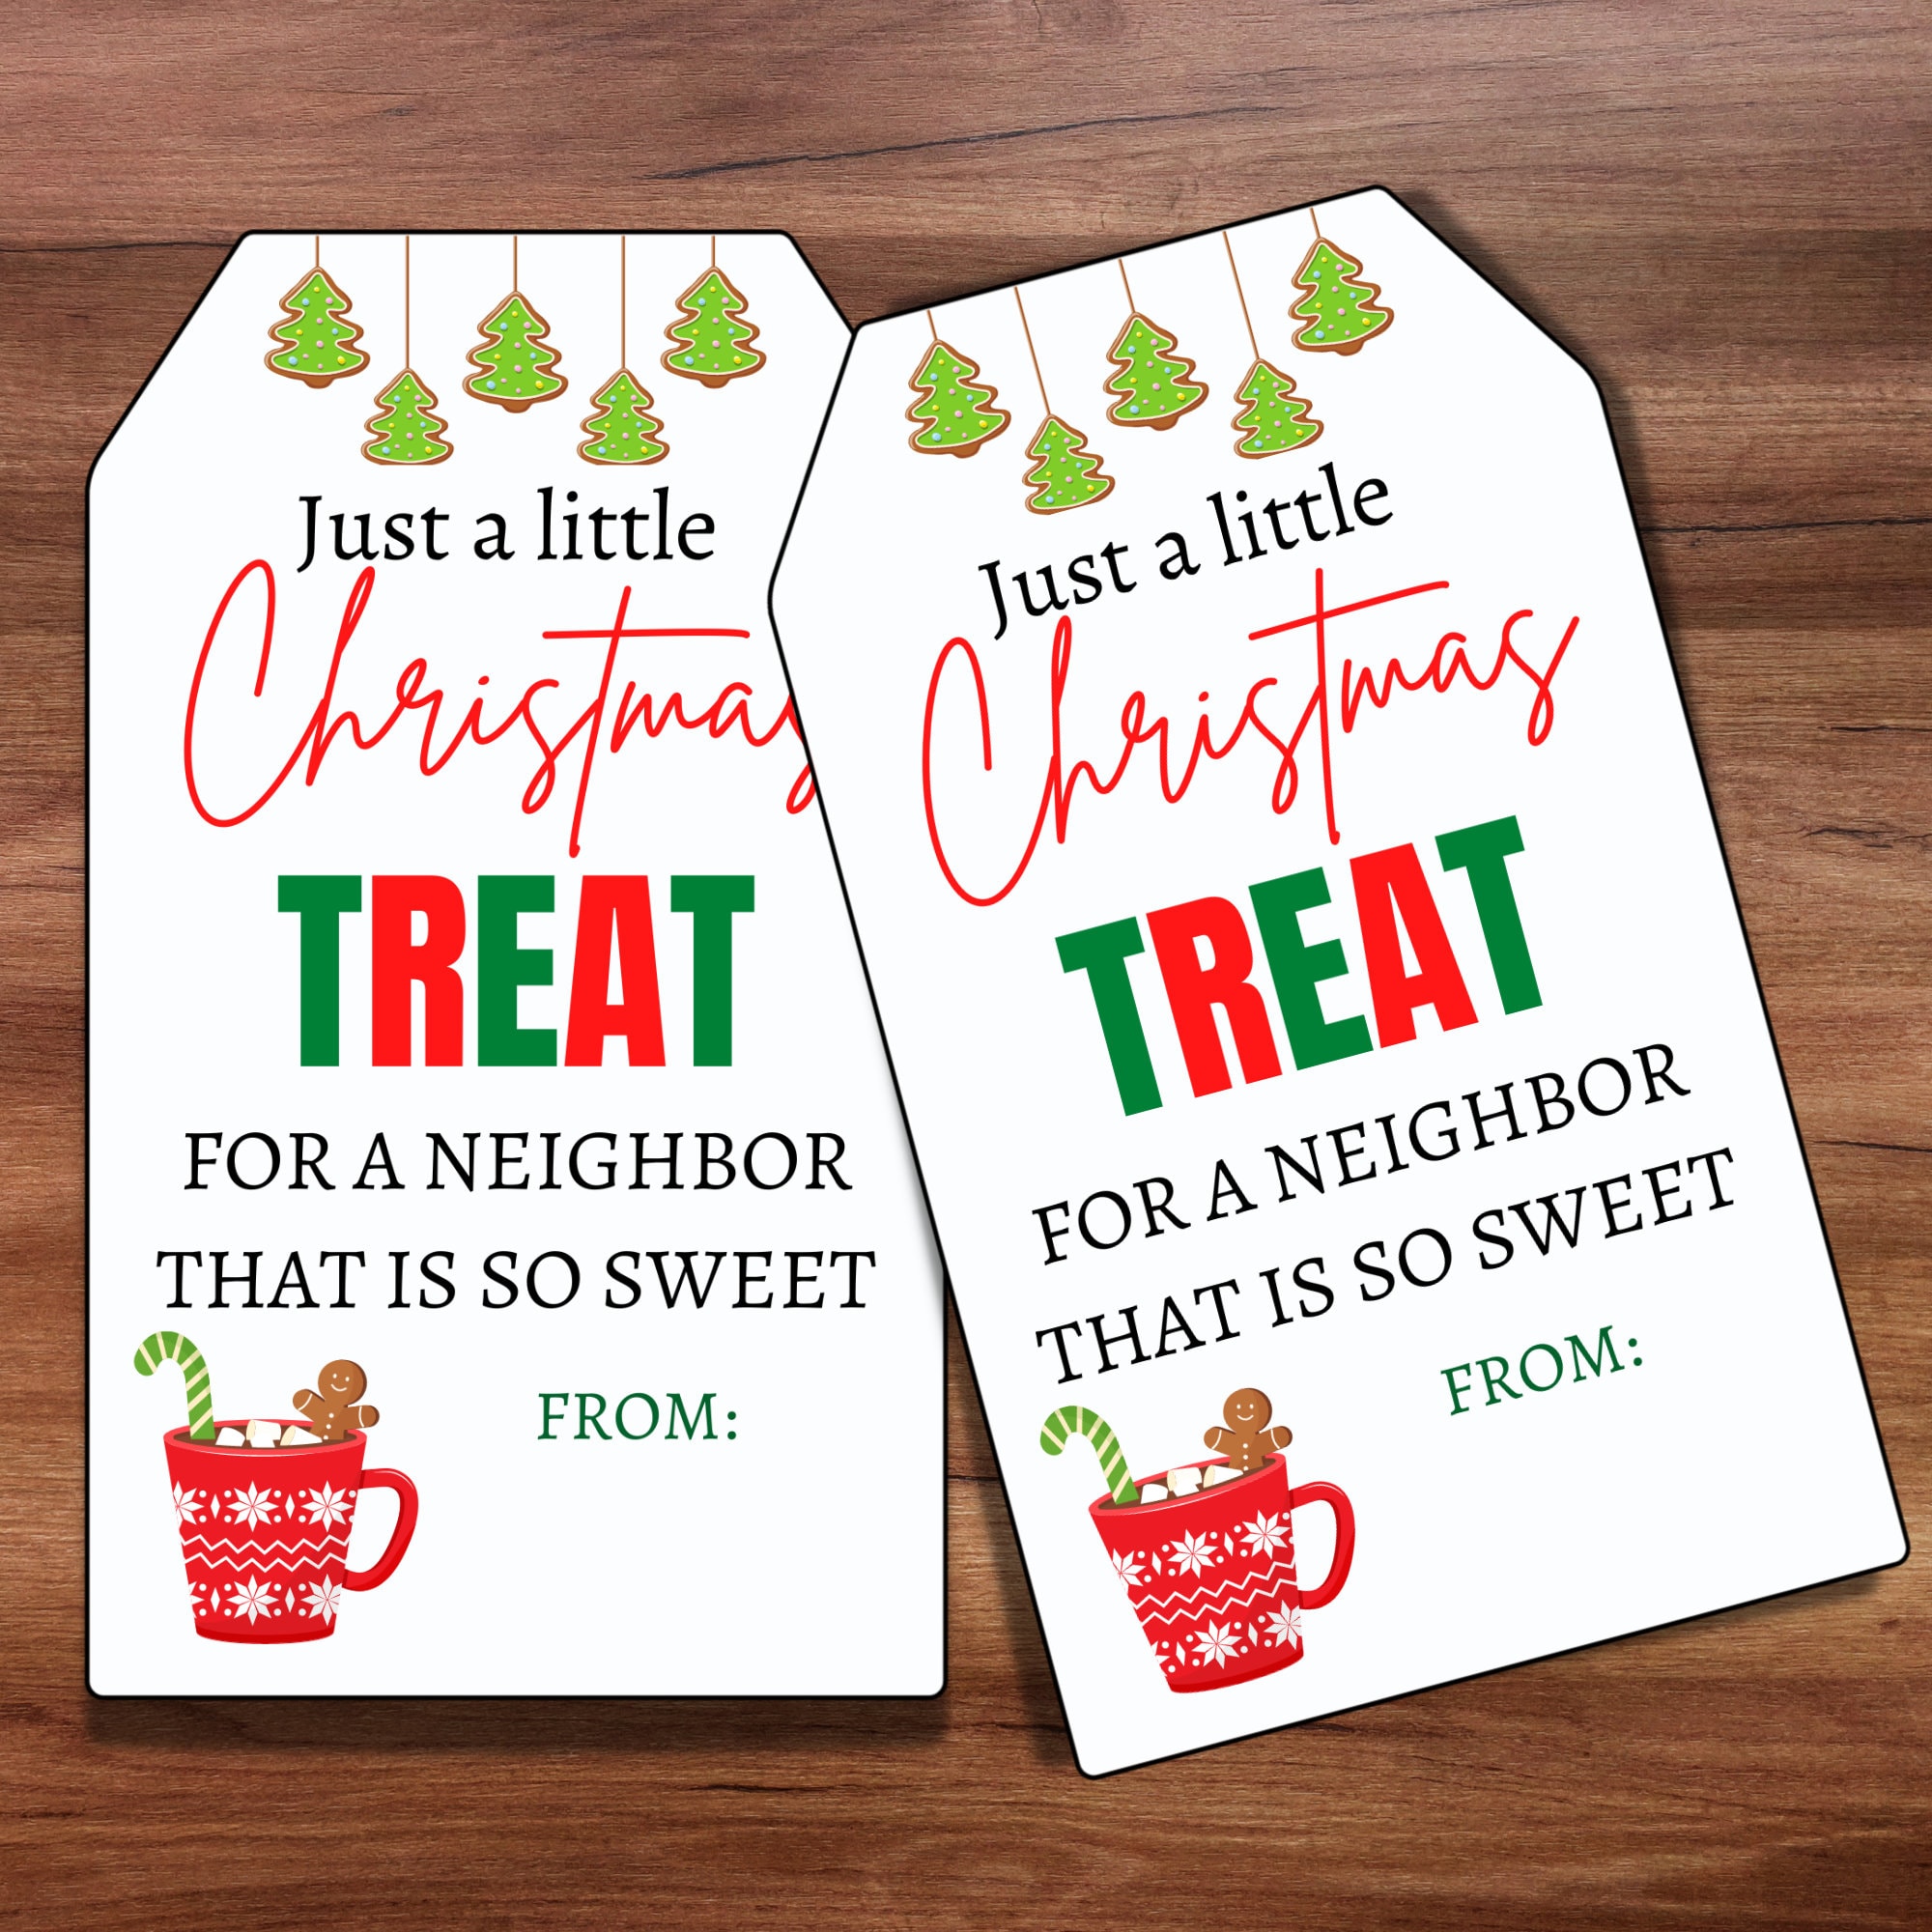 Neighbor Christmas Gifts Everyone Is Sure To Love!